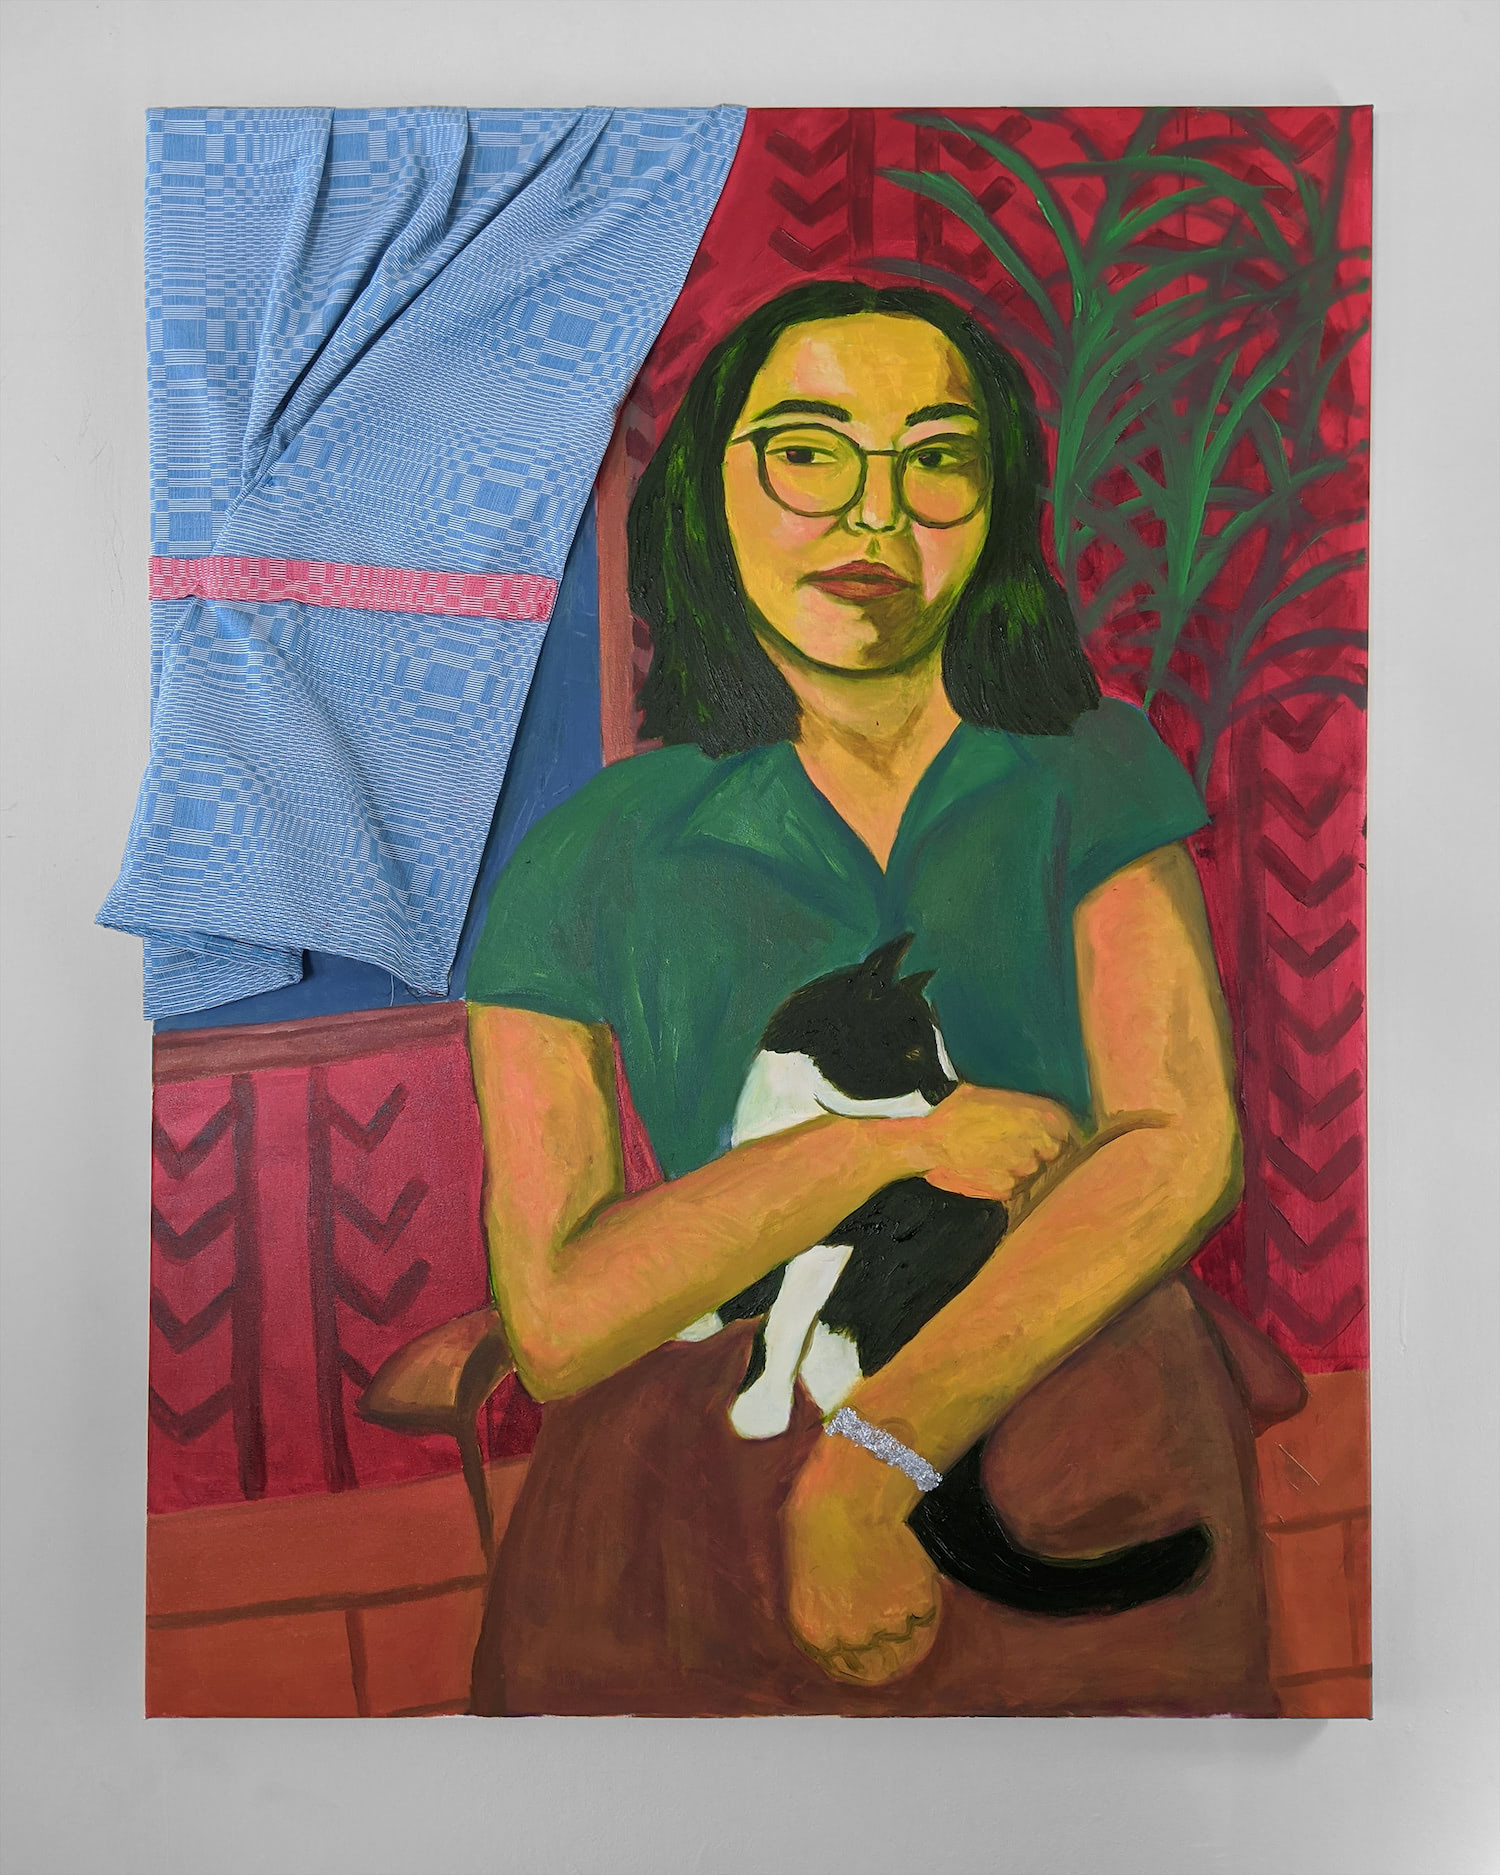 A painting with a woman seated in the center, holding a cat. She is painted yellow. There are plants in the background and fabric attached to canvas to mimic a curtain. The woman is gazing directly at the viewer, looking aloof but strong.